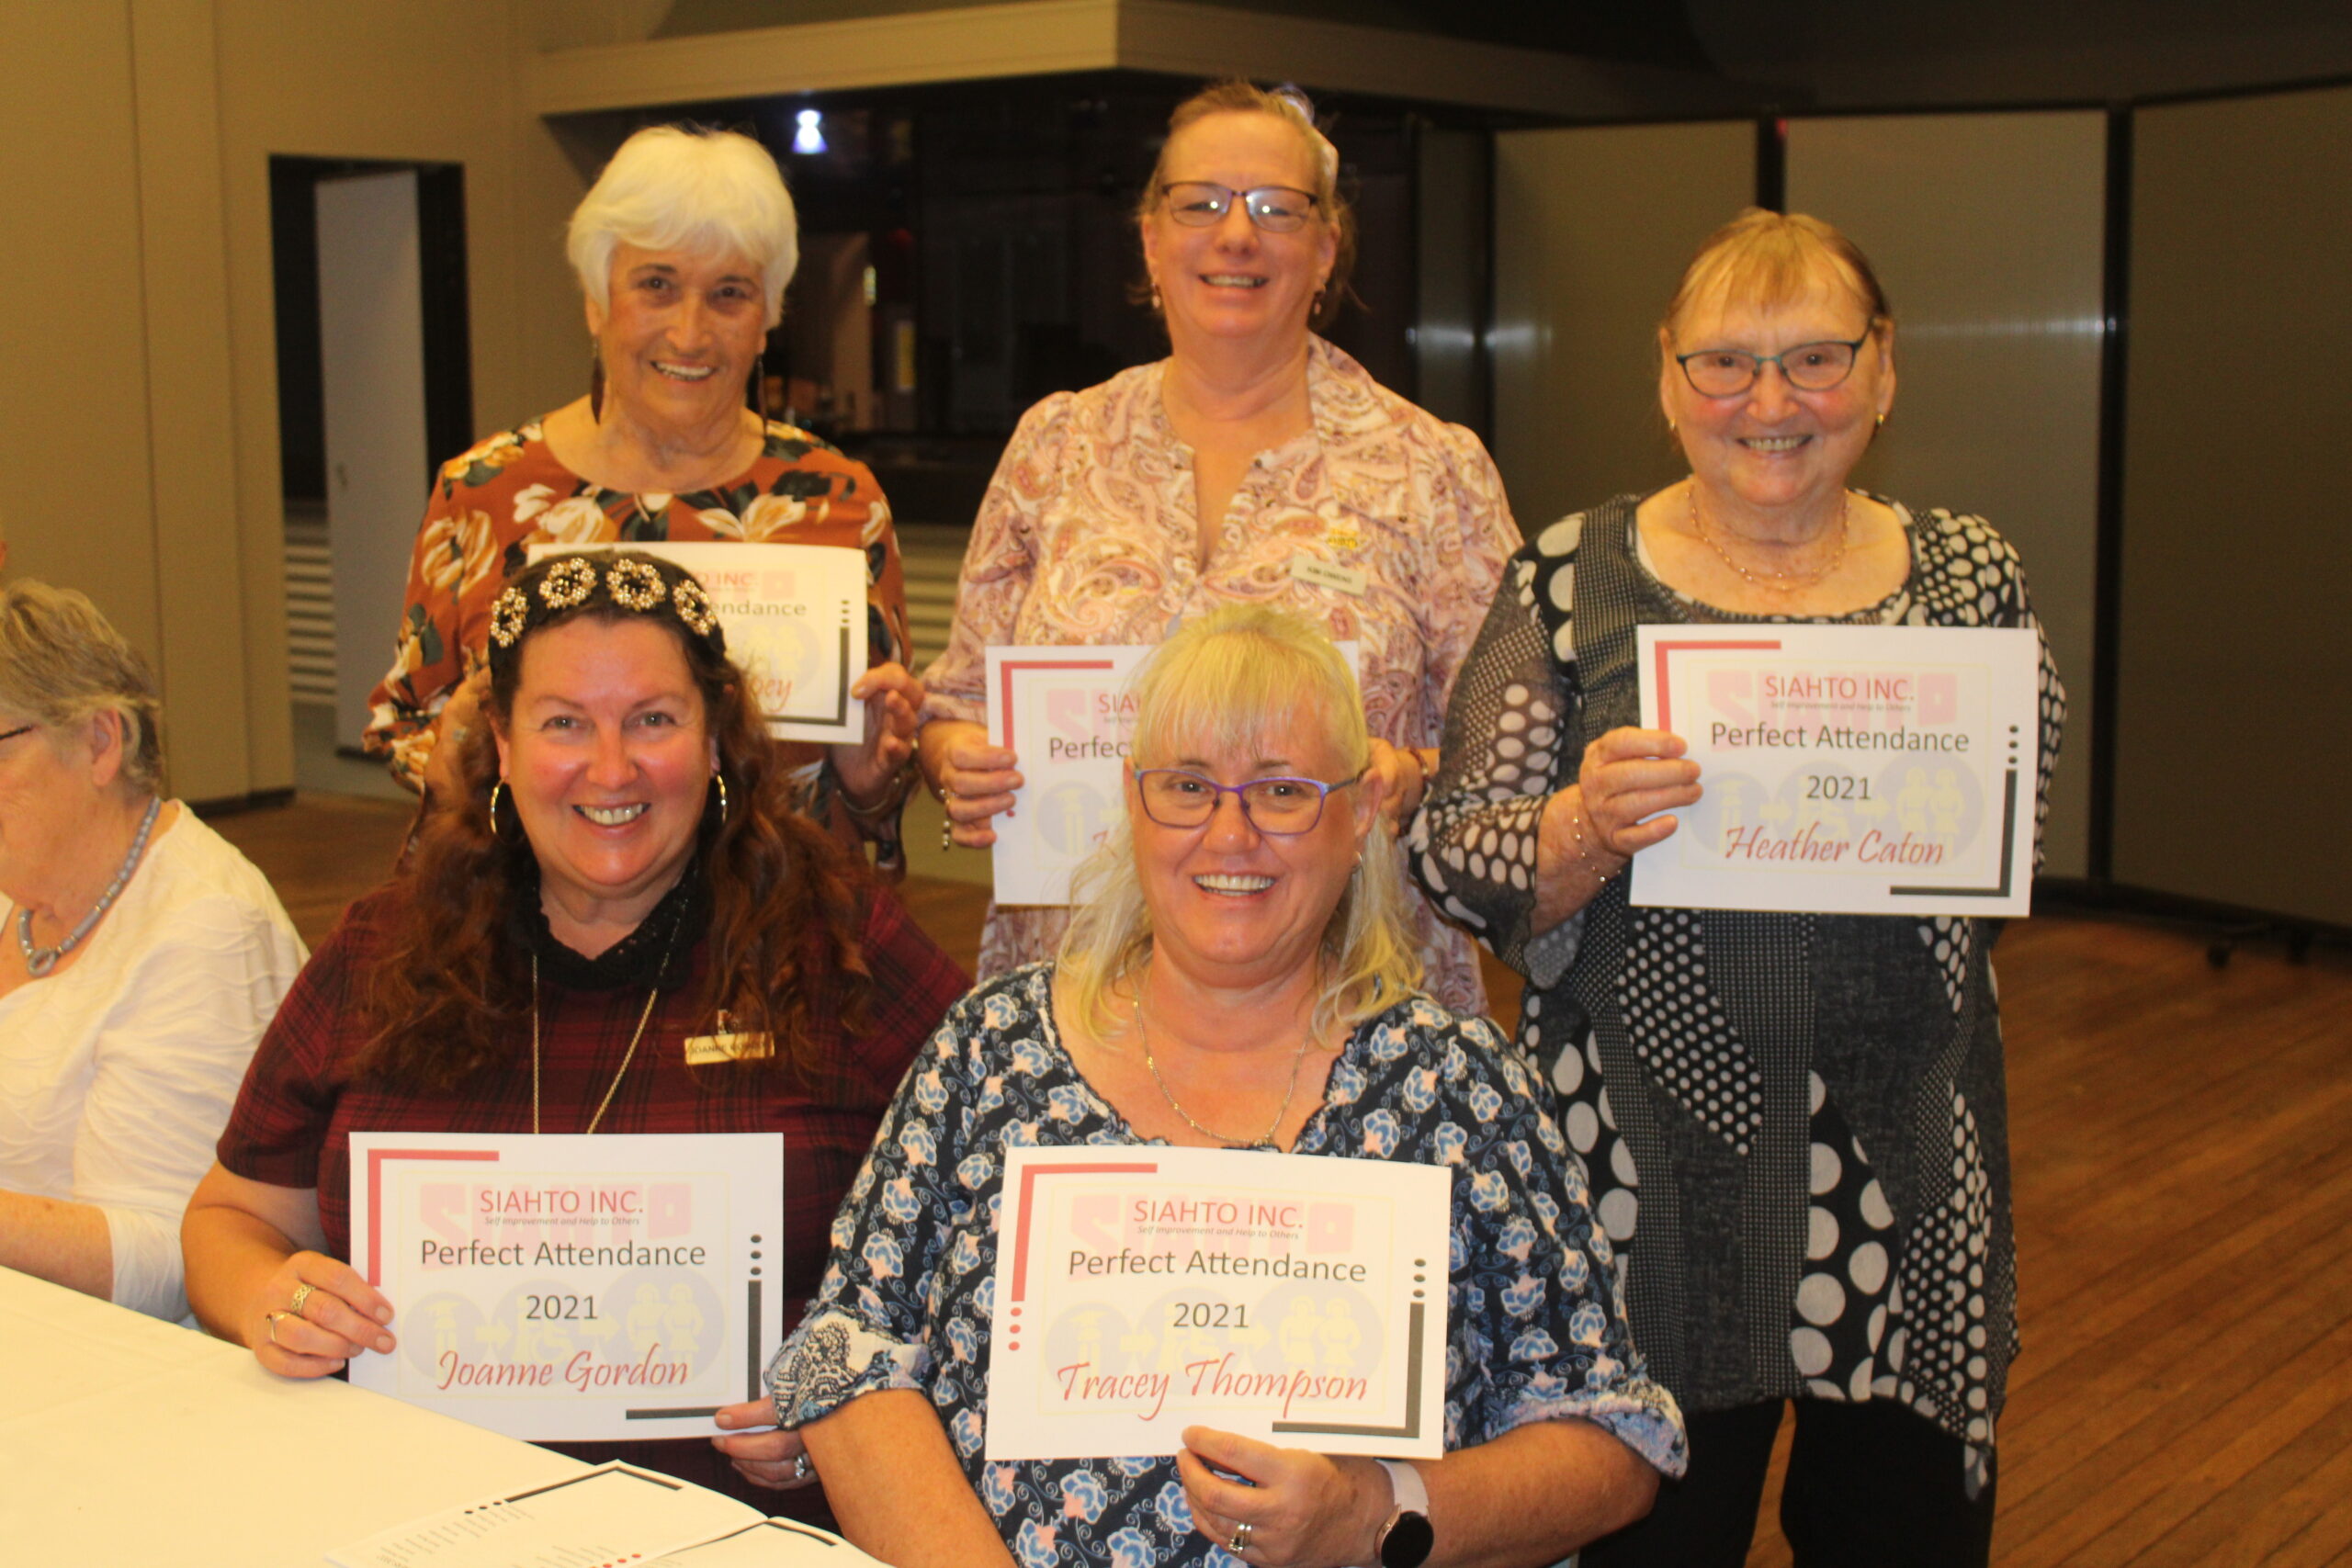 2021 SIAHTO Perfect Attendance awardEEs: Back, Olwyn Campey, Kim Owens, Heather Caton, front, Joanne Gordon and Tracey Thompson.